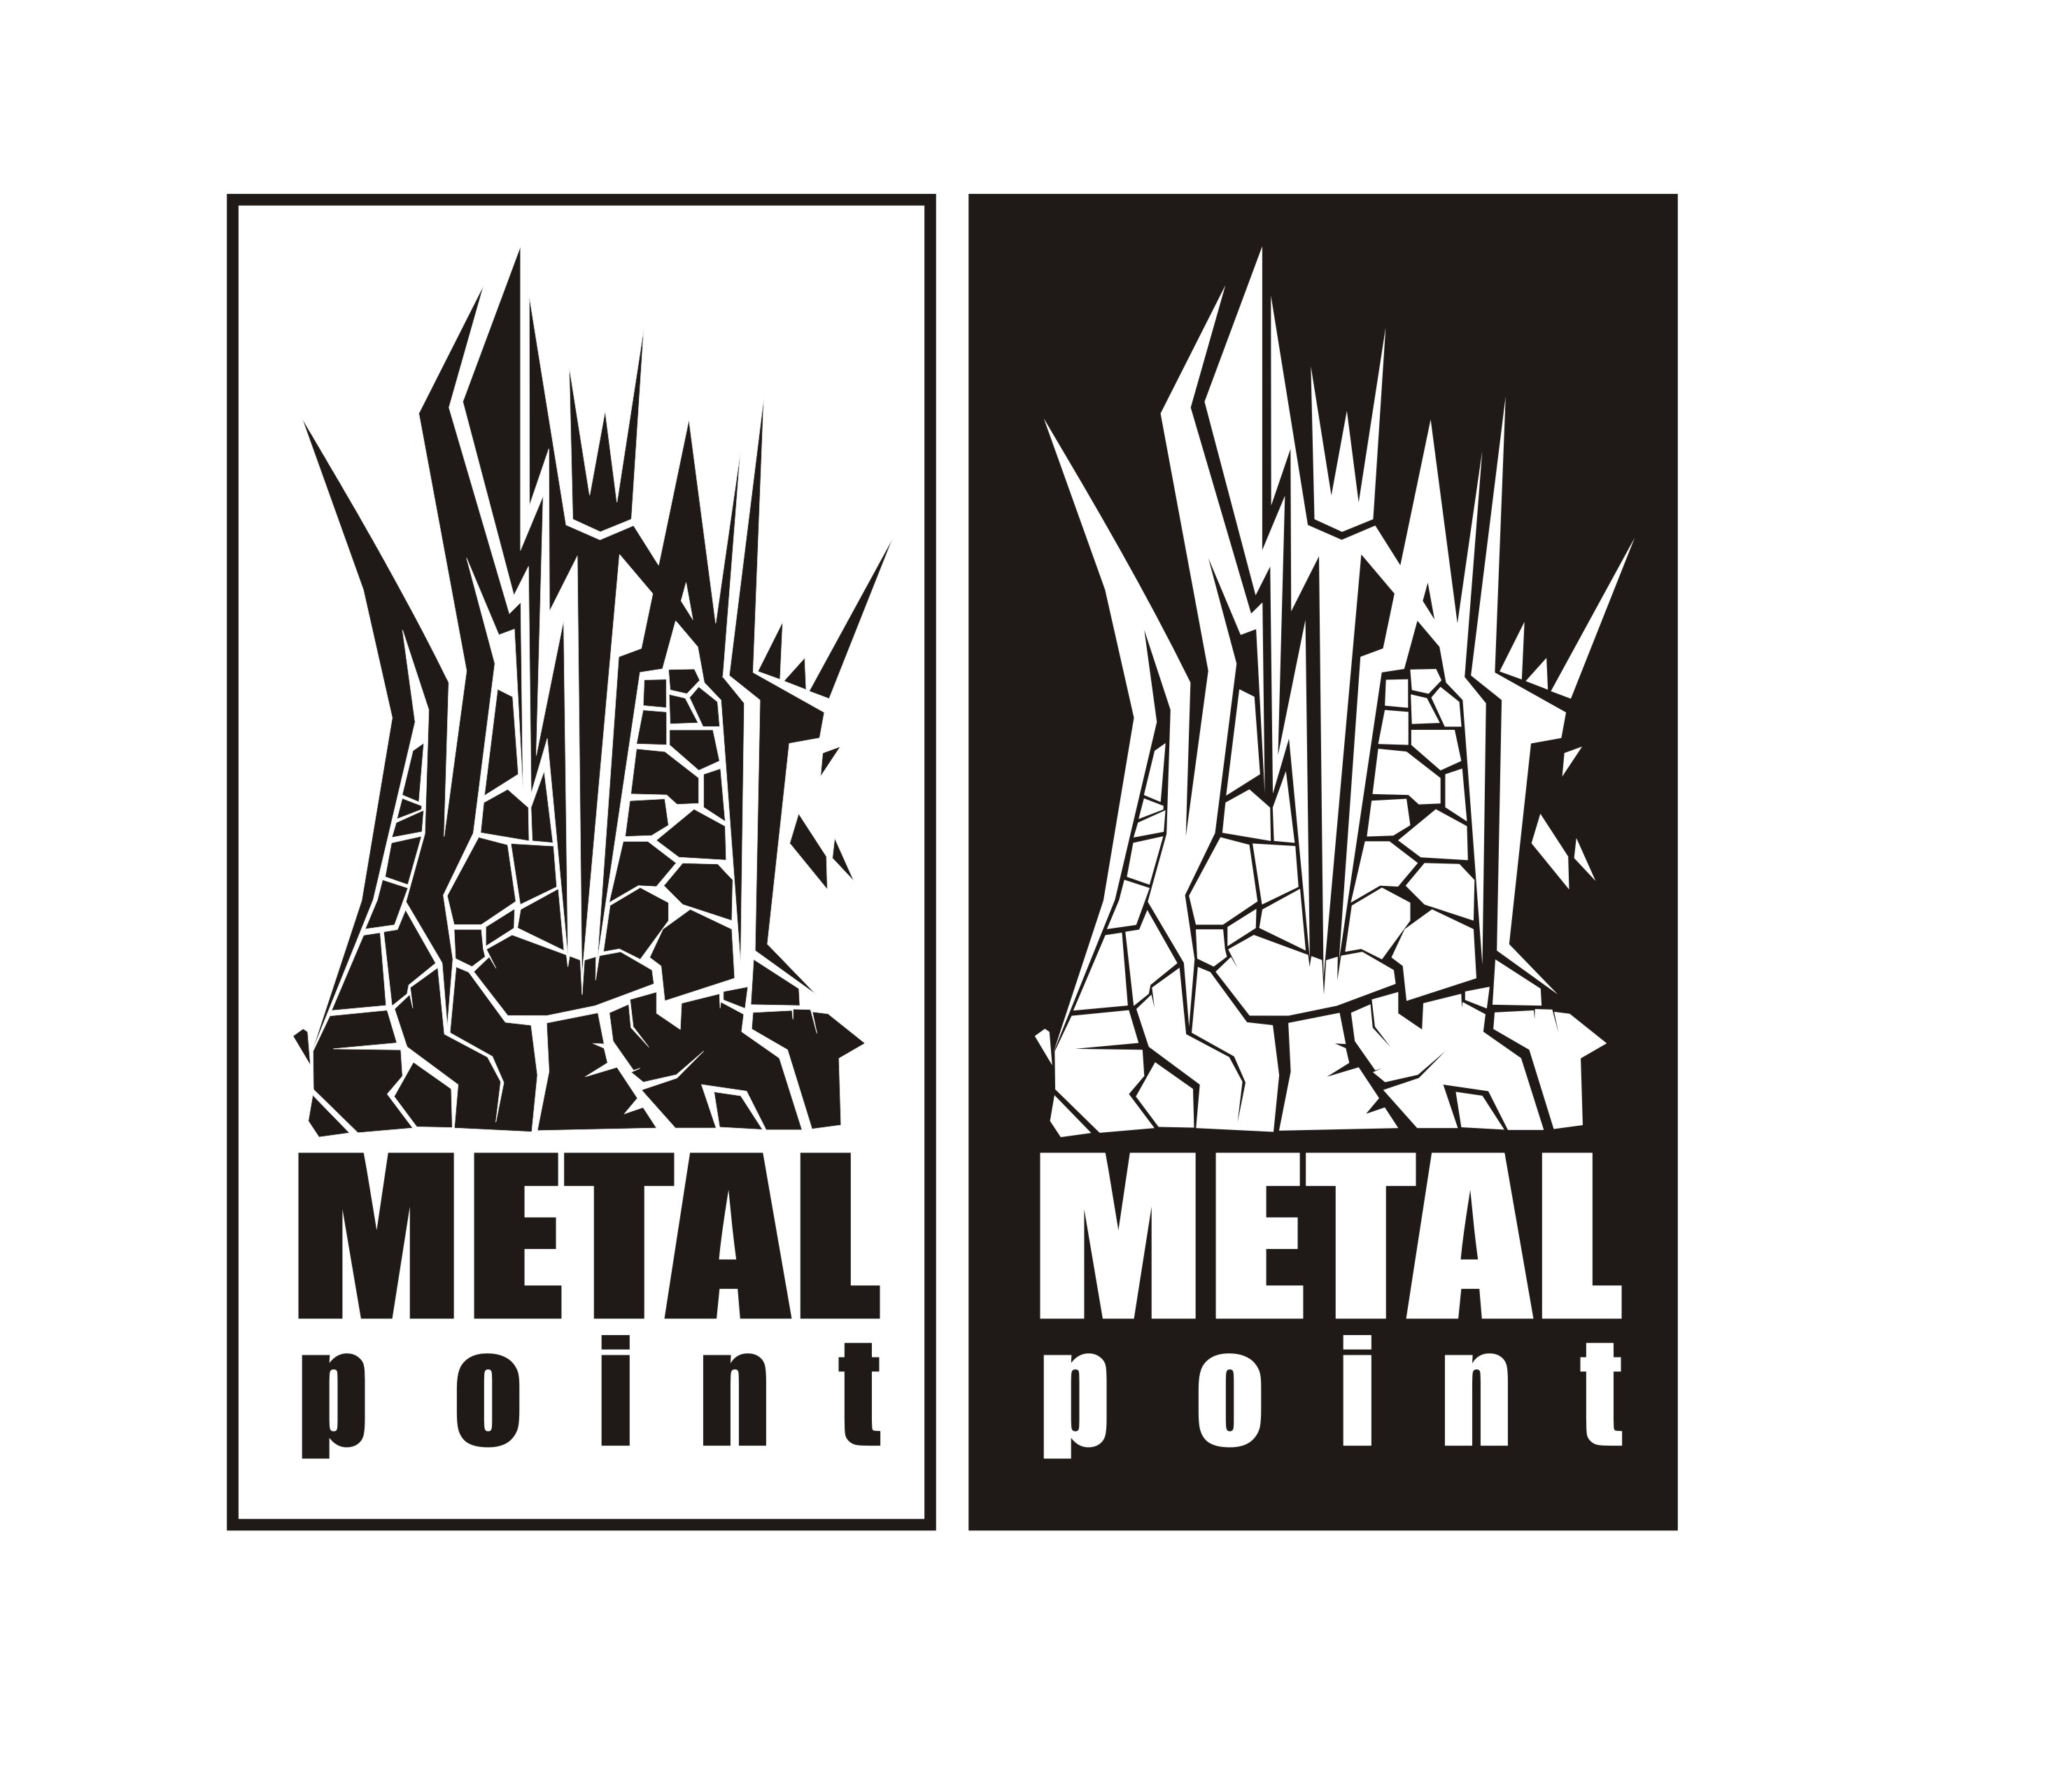 Metal Point